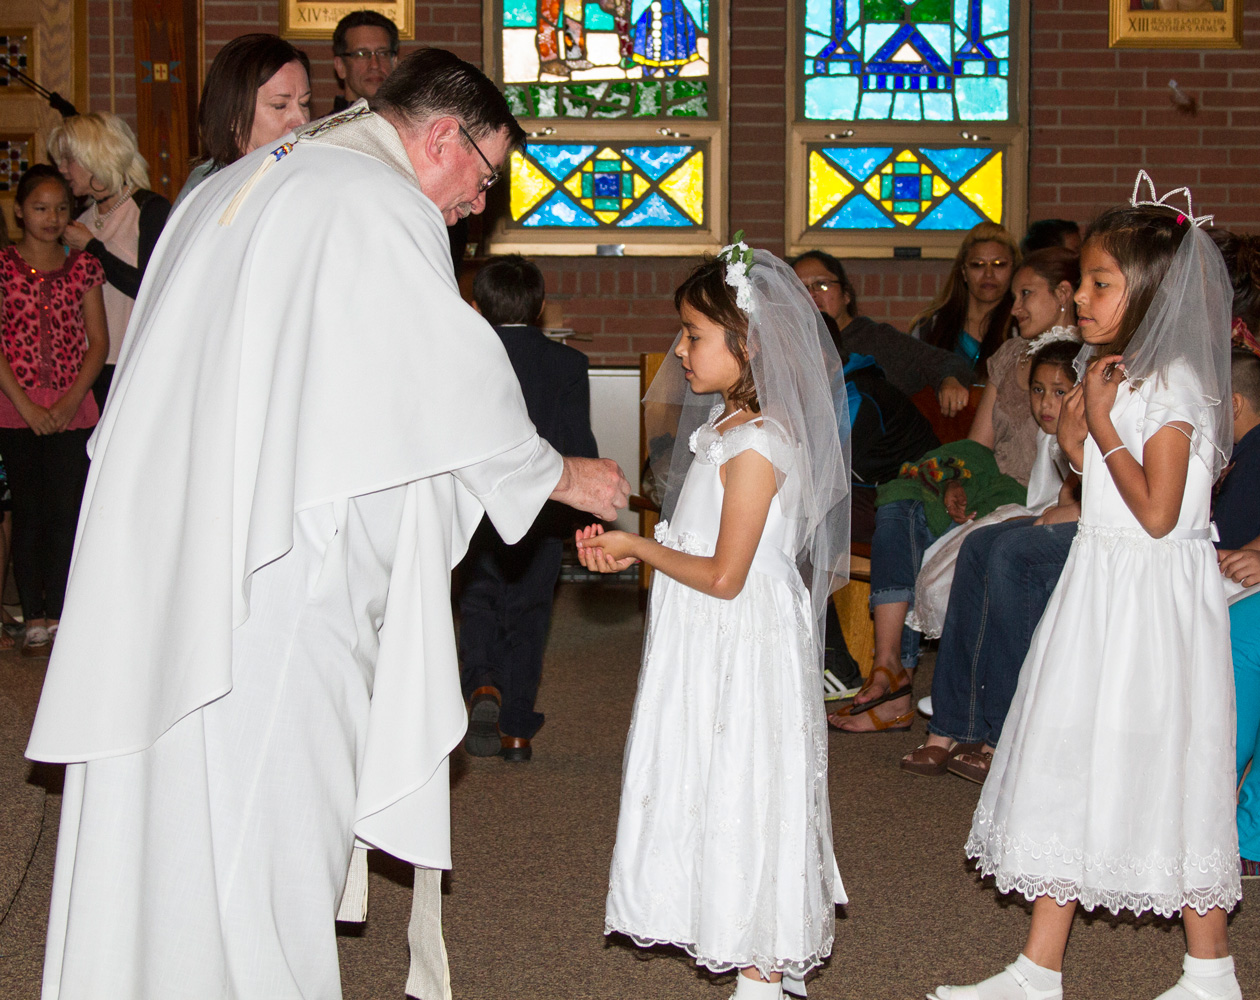 Fr. Anthony gives a Lakota child her First Holy Communion. 